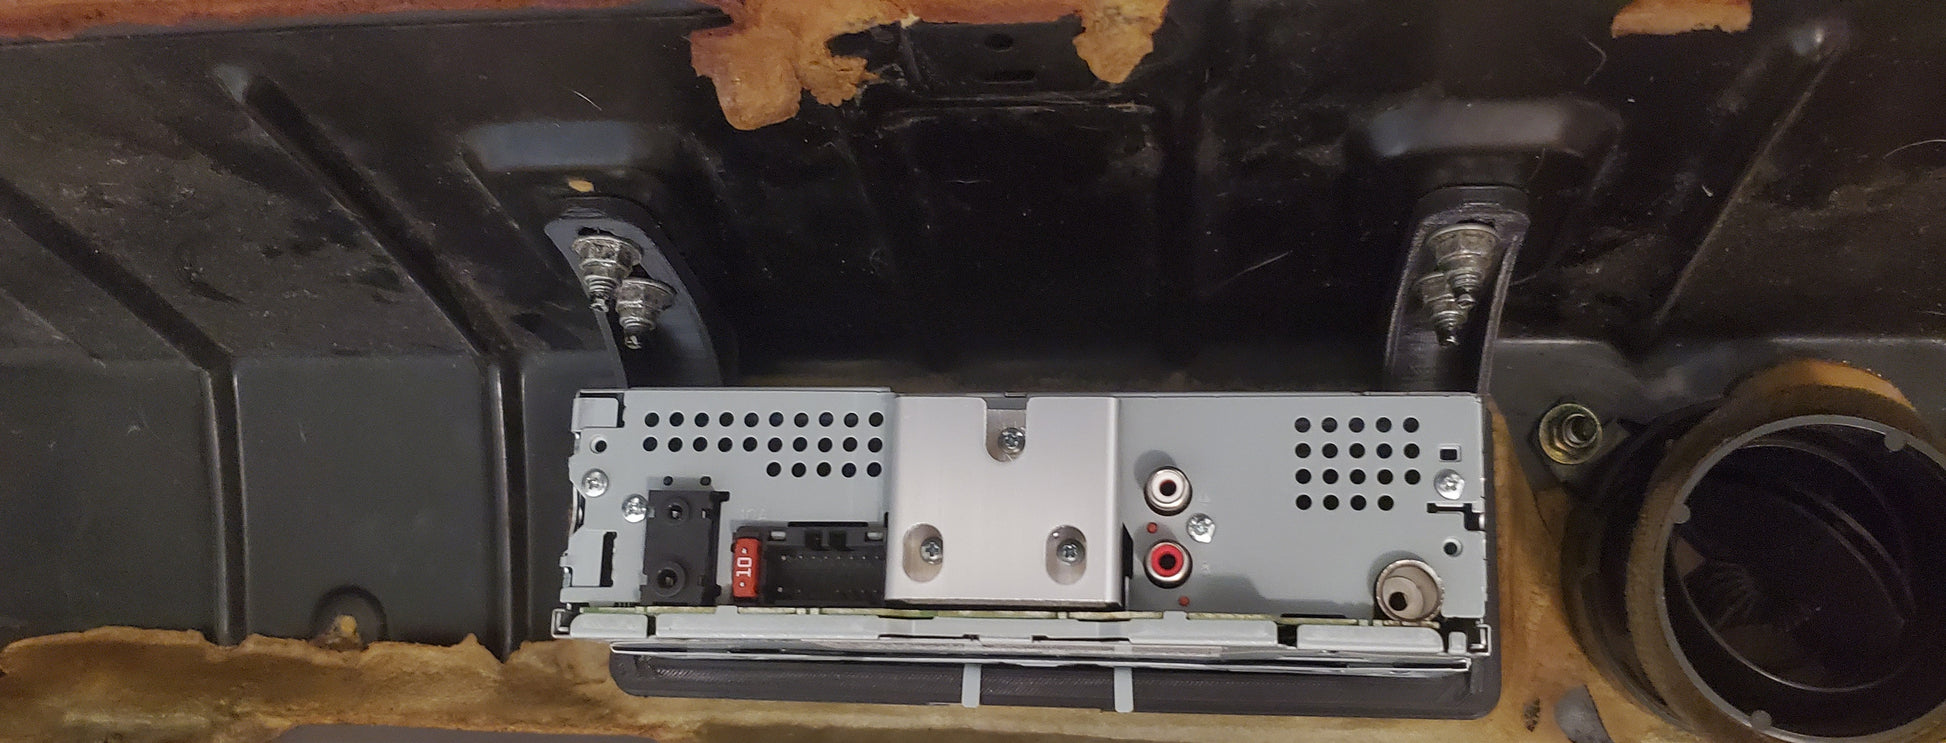 Inside rear view of an installed FJ60 Radio using the 3D printed Radio Bracket